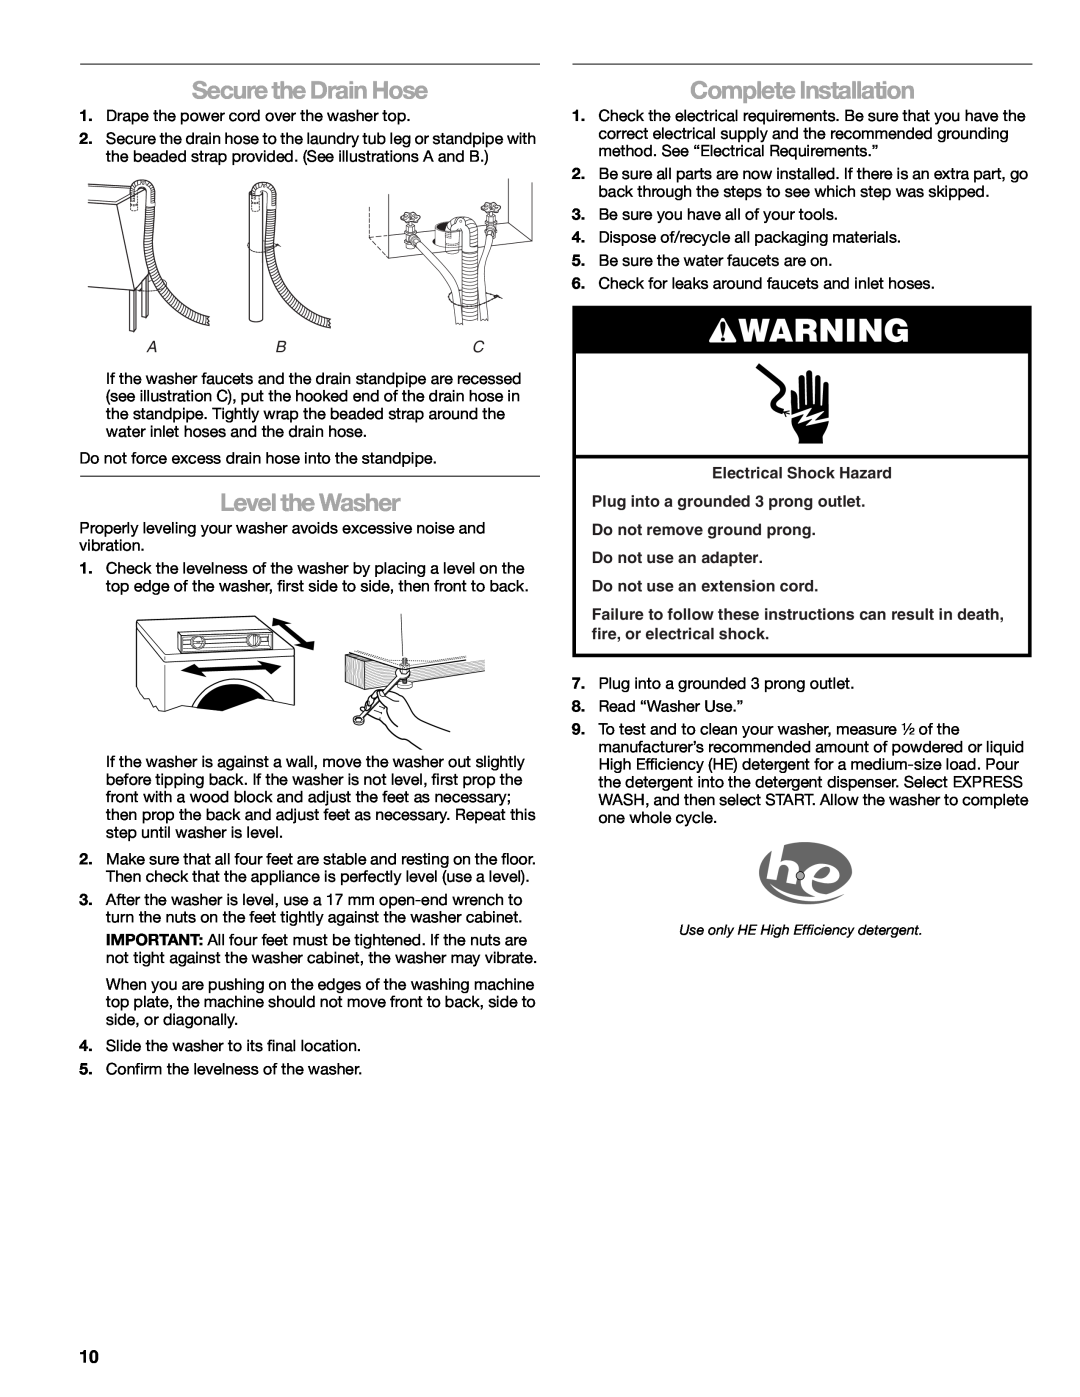 Kenmore W10133487A manual Secure the Drain Hose, Level the Washer, Complete Installation, Do not use an extension cord 